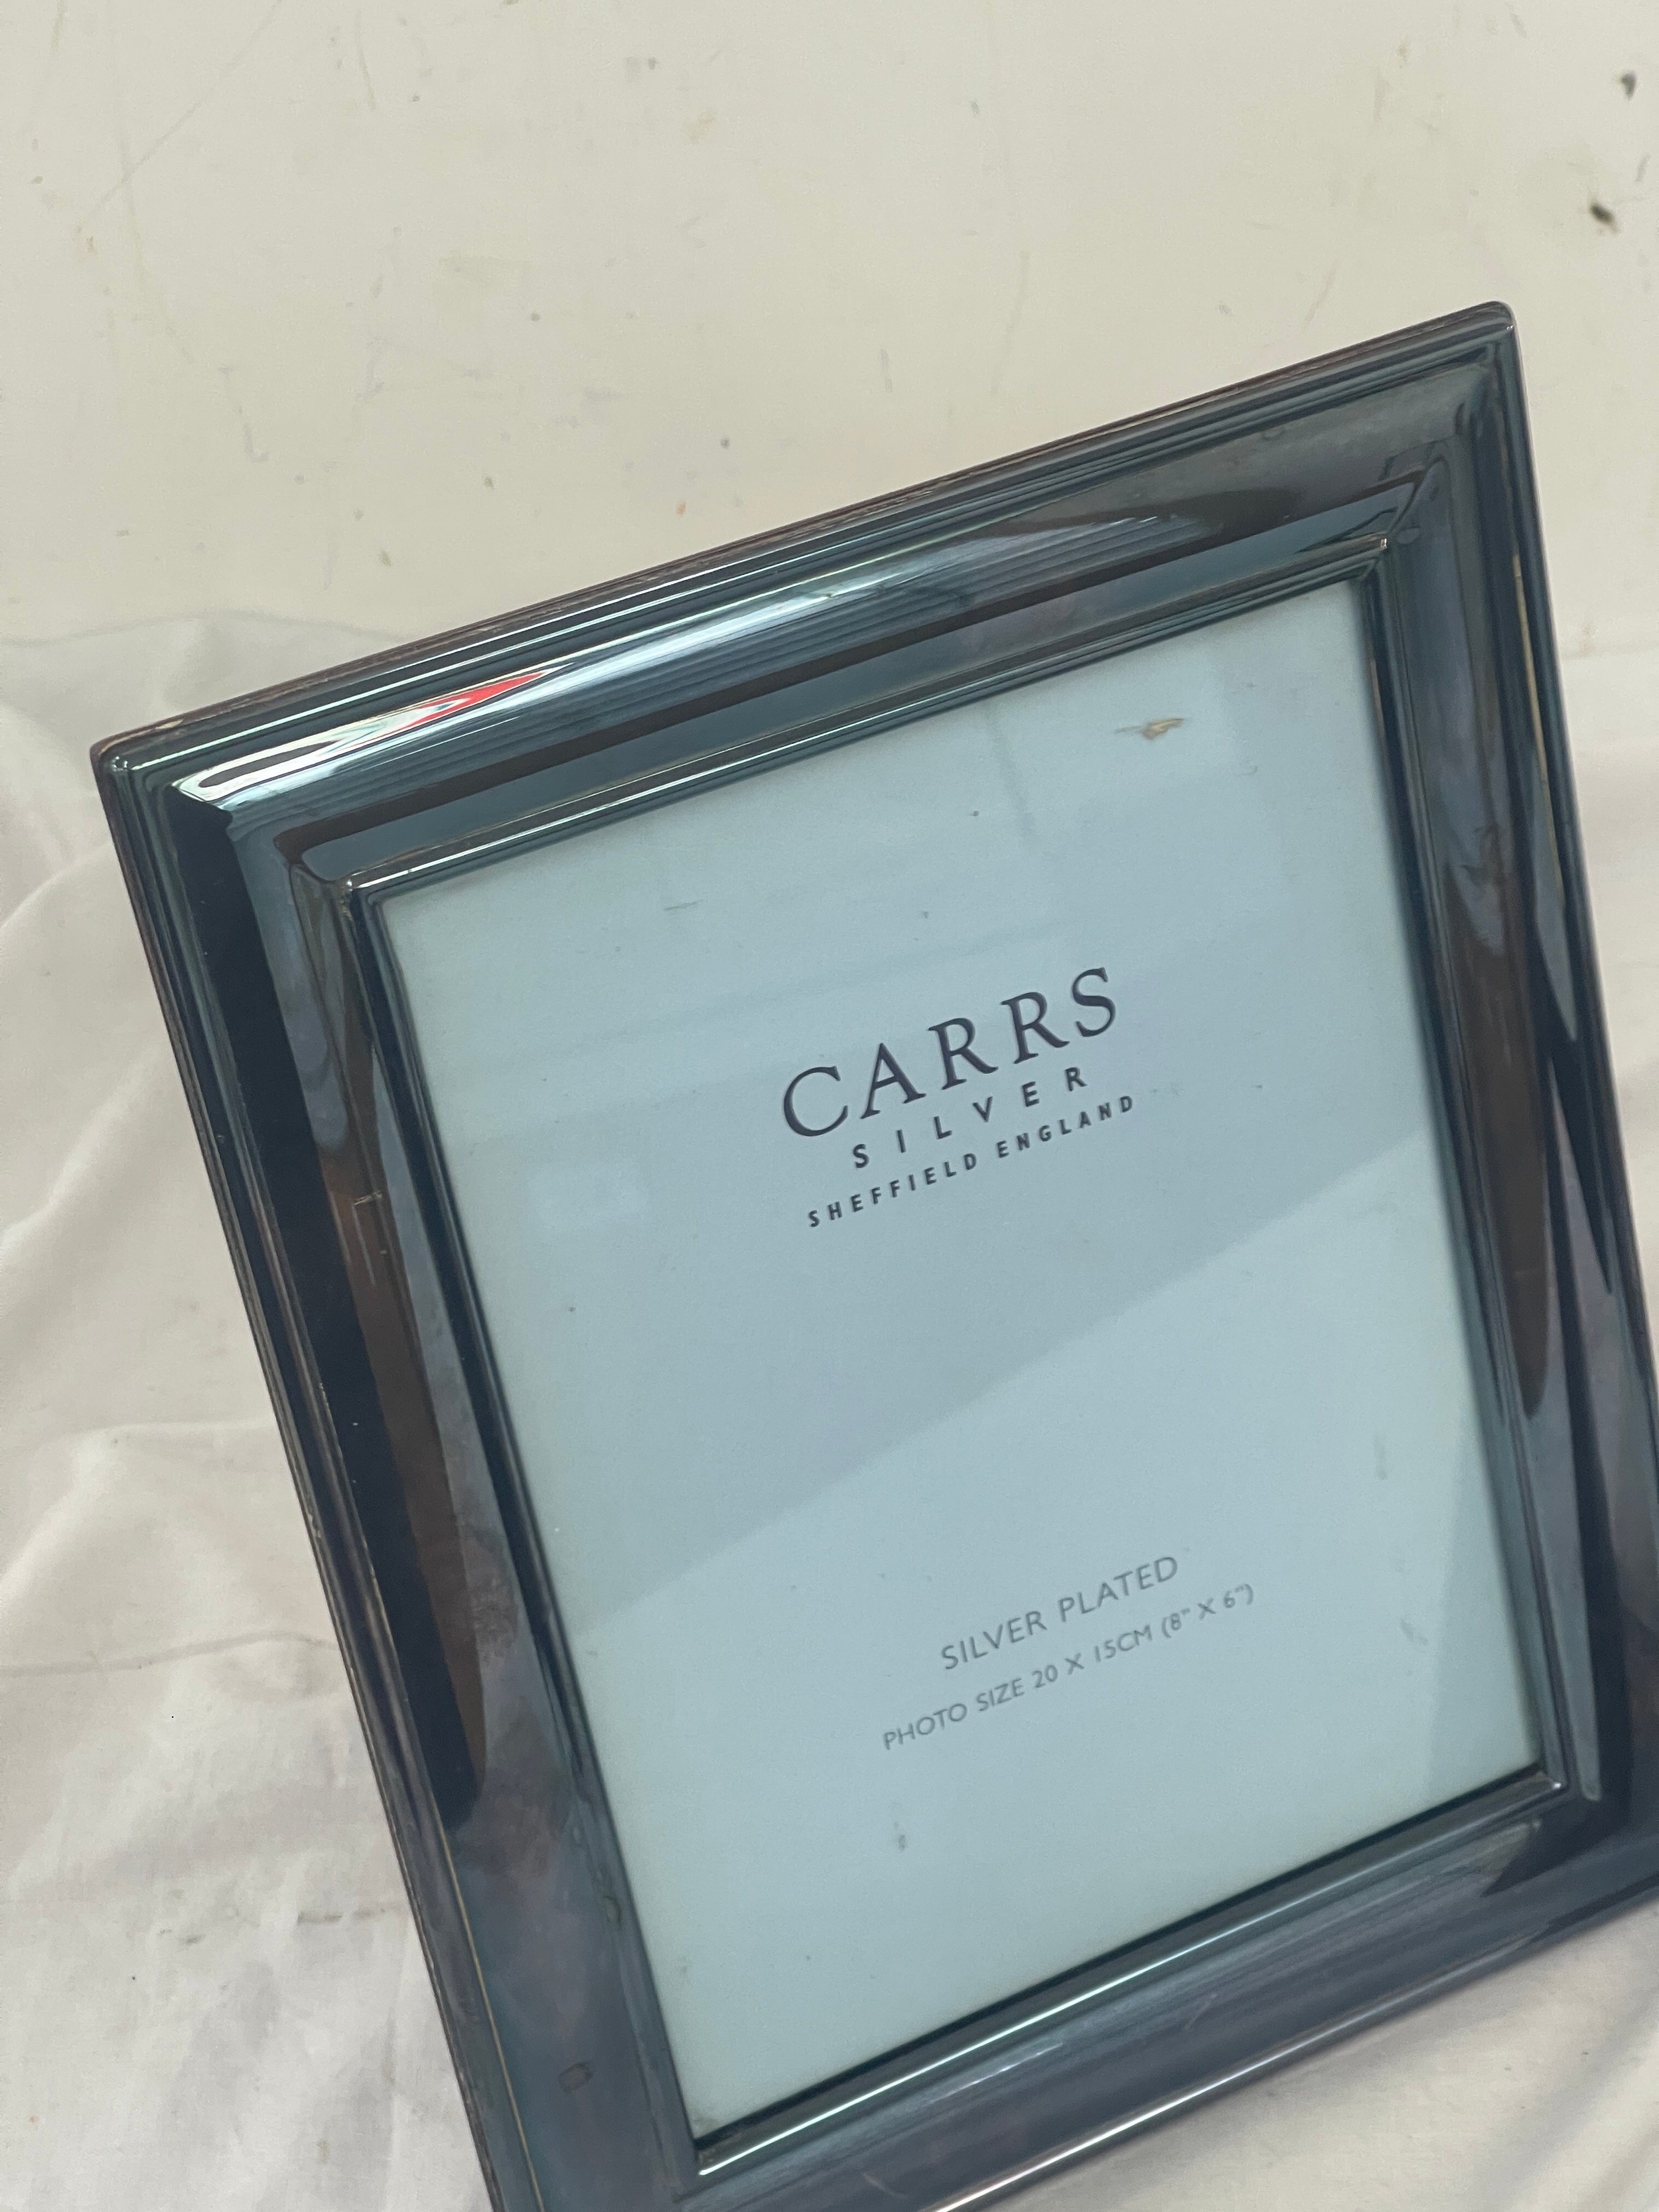 Pair of Carrs Silver plated photo frames, photo size 20 x 15cm - Image 3 of 4